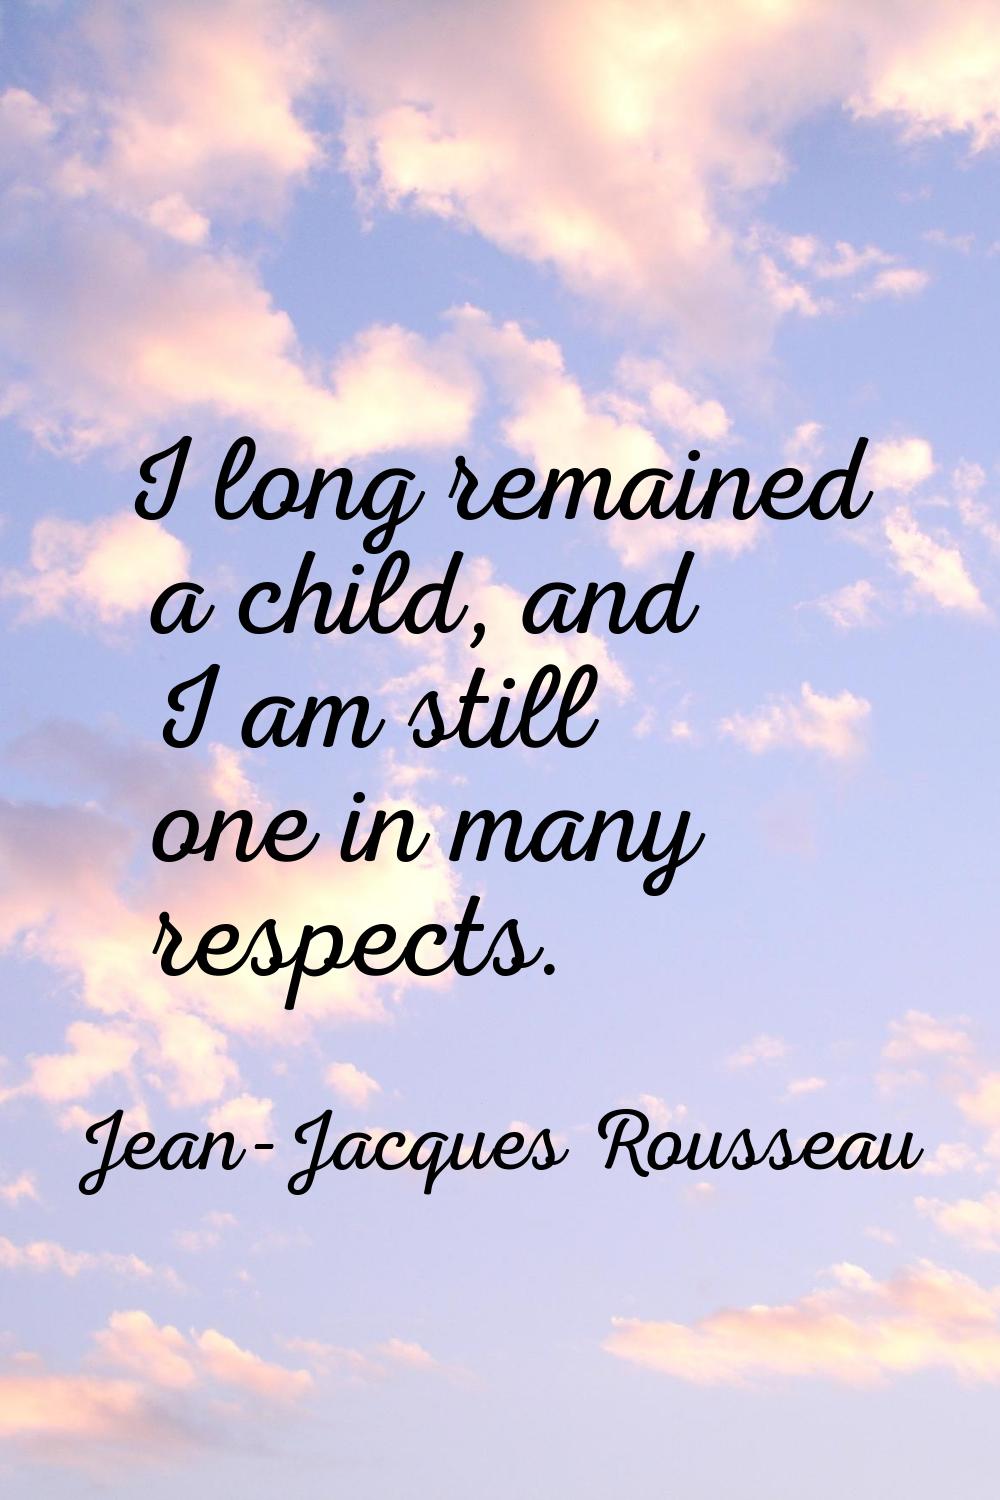 I long remained a child, and I am still one in many respects.